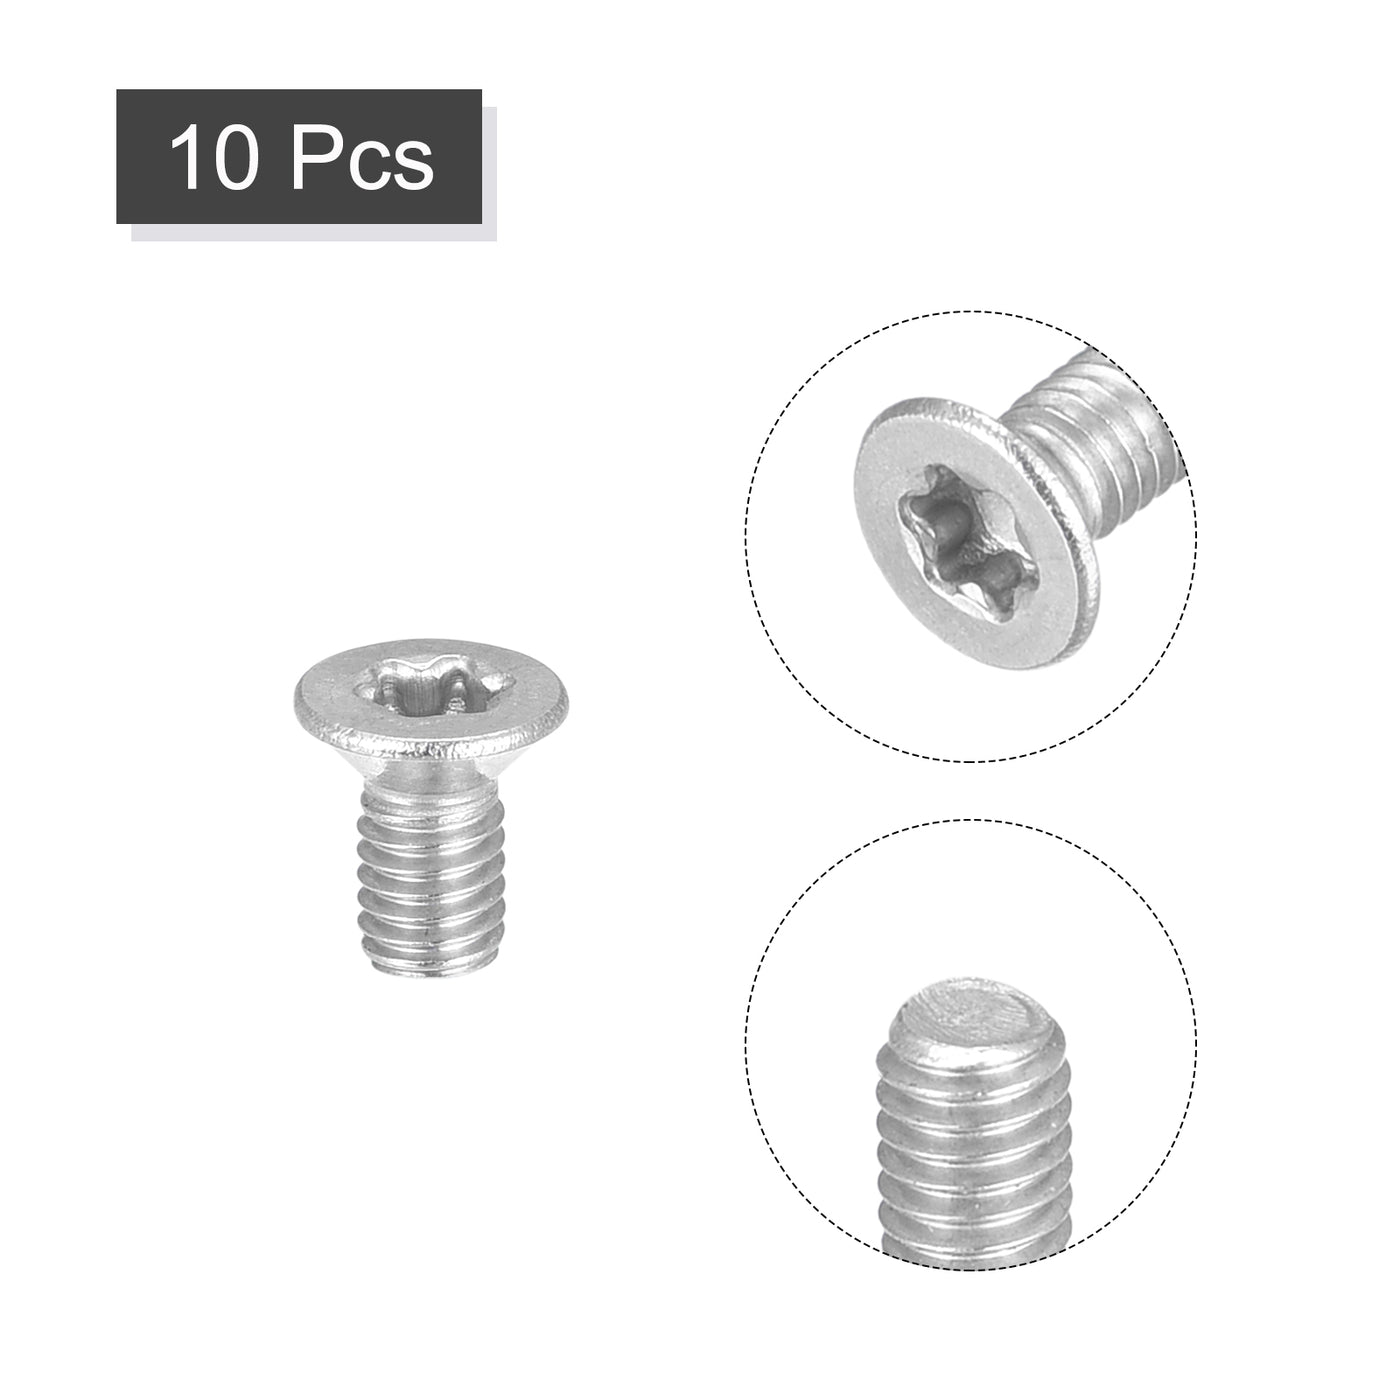 uxcell Uxcell M3x6mm Torx Security Screws, 10pcs 316 Stainless Steel Countersunk Head Screw